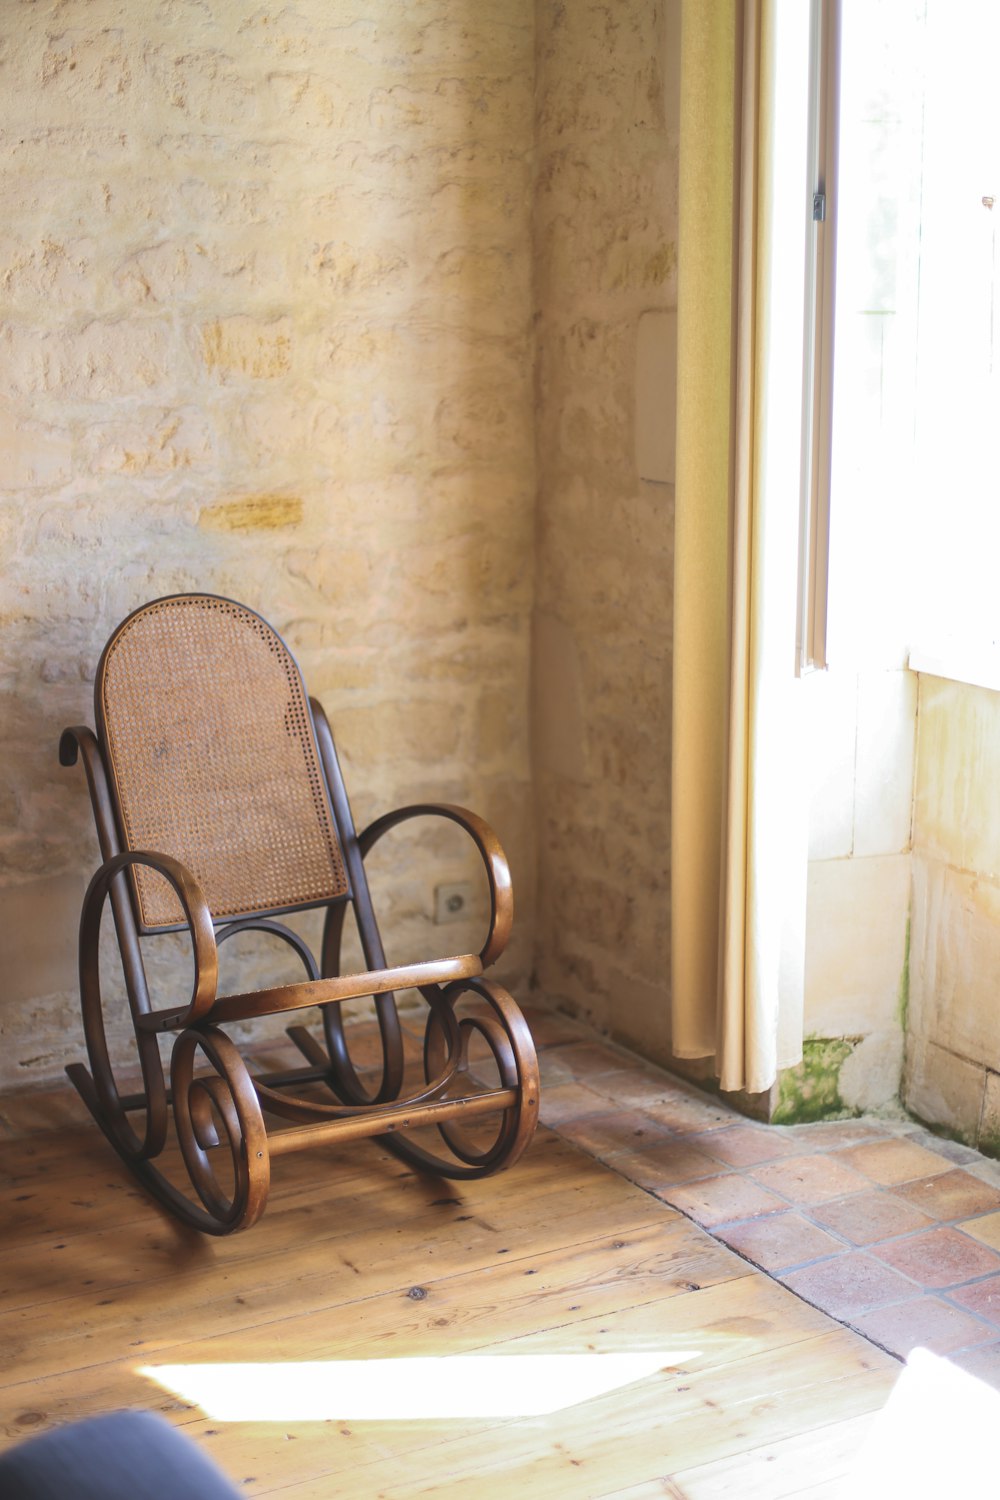 a rocking chair sitting in a room next to a window